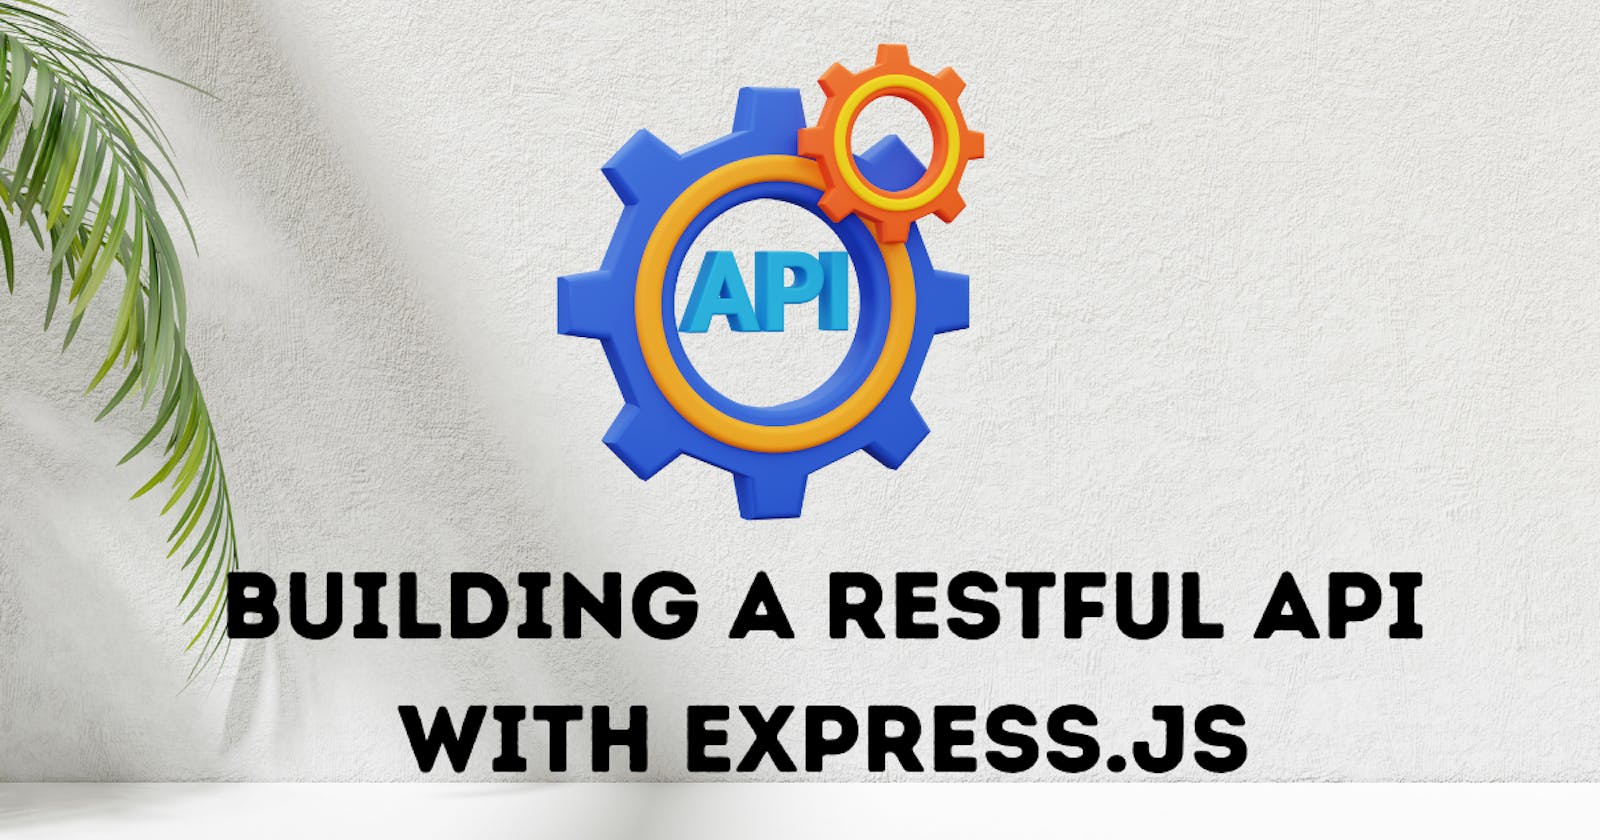 Building a RESTful API with Express.js: Creating CRUD operations with Express.js.